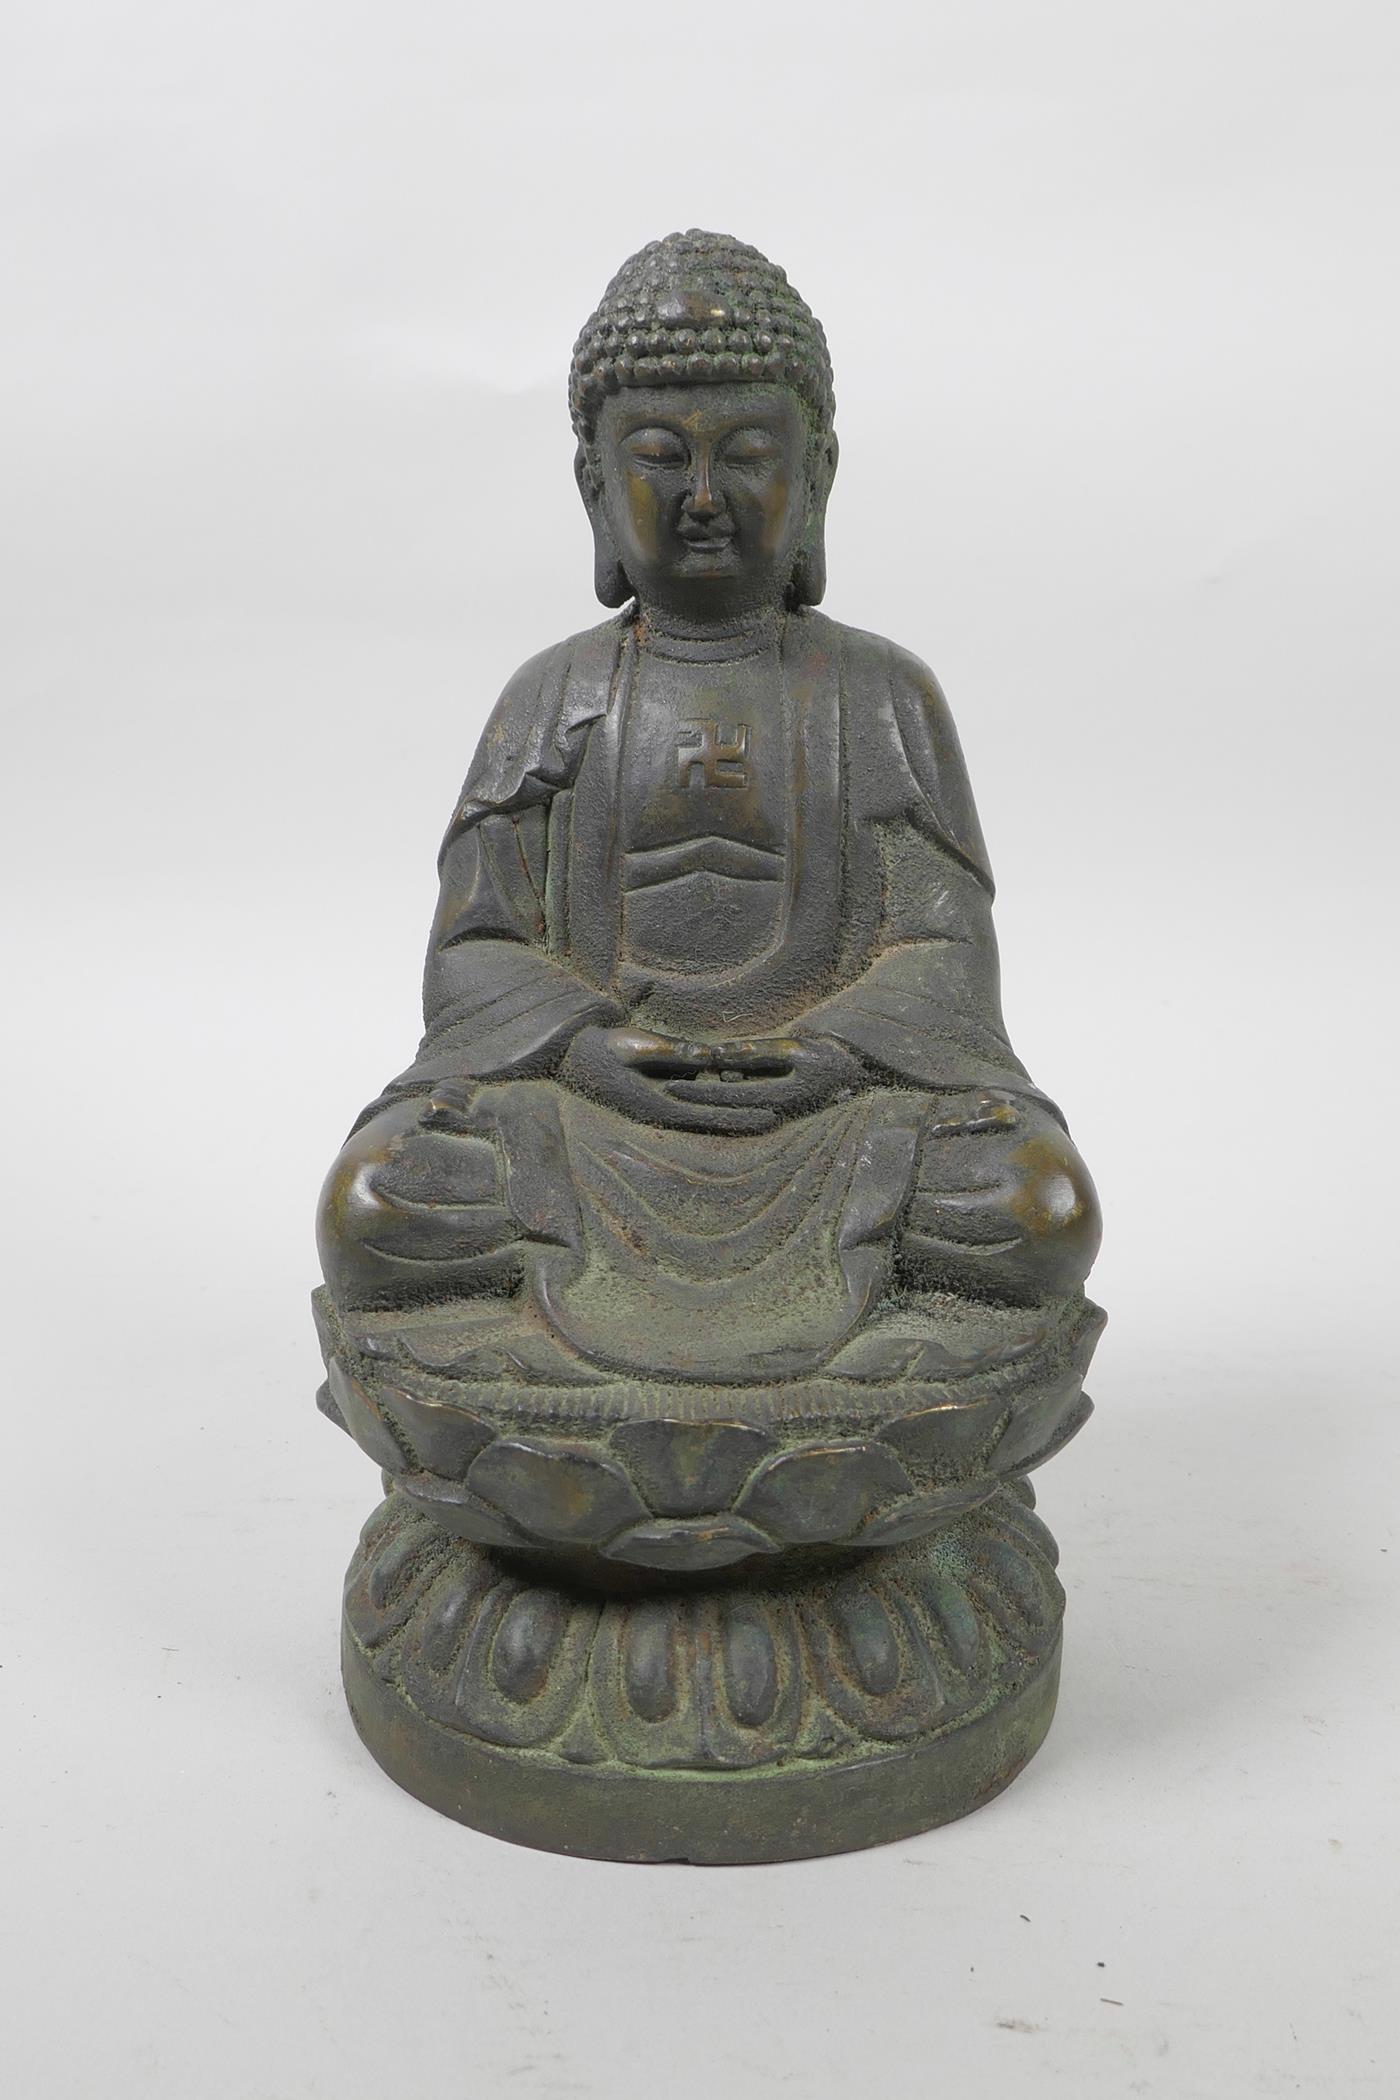 A bronze of Buddha seated on a lotus throne with verdigris patina, 8" high